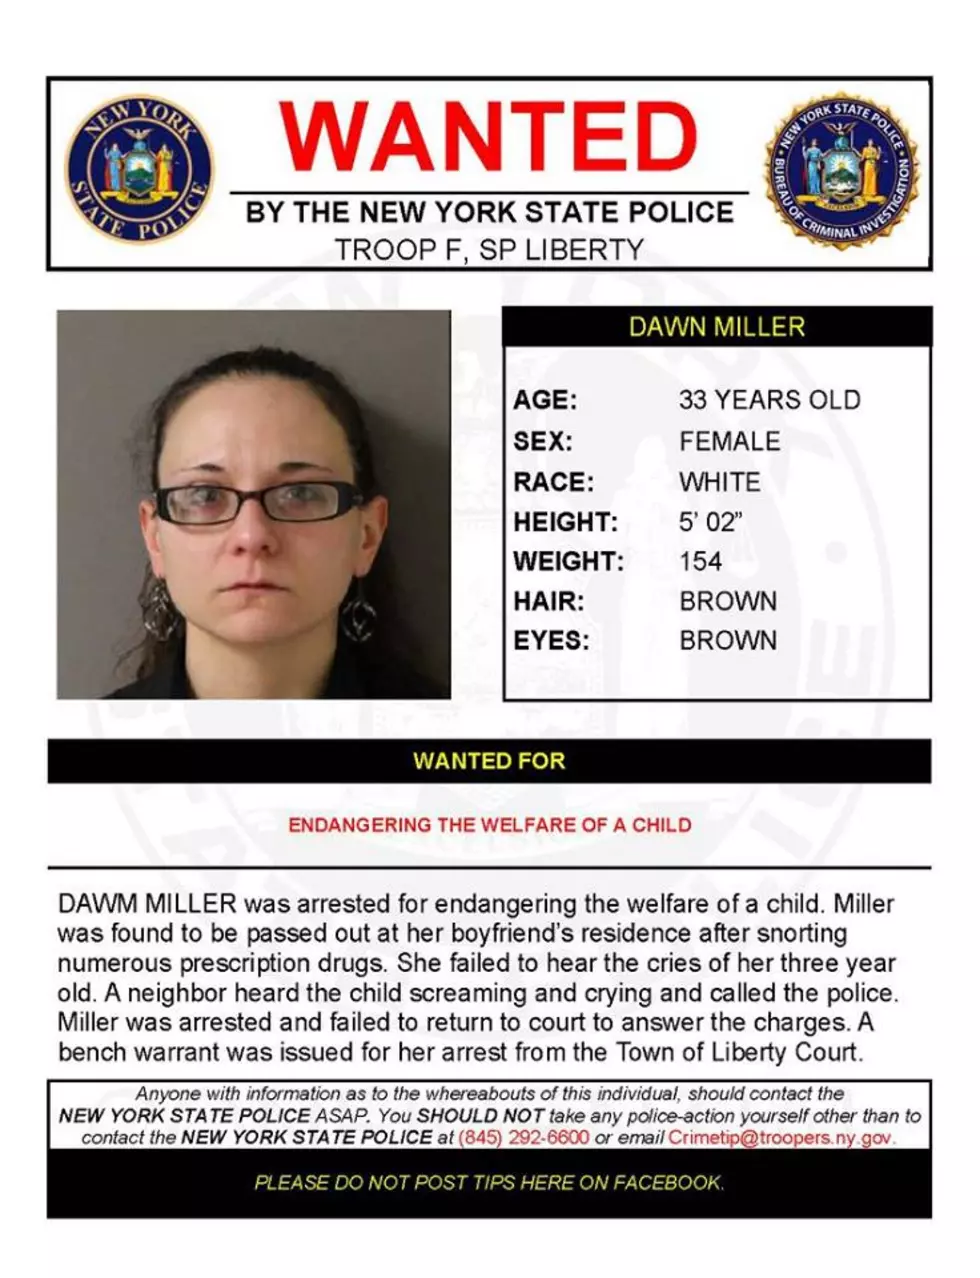 Warrant Wednesday: A Sullivan County Woman Wanted for Endangering the Welfare of a Child